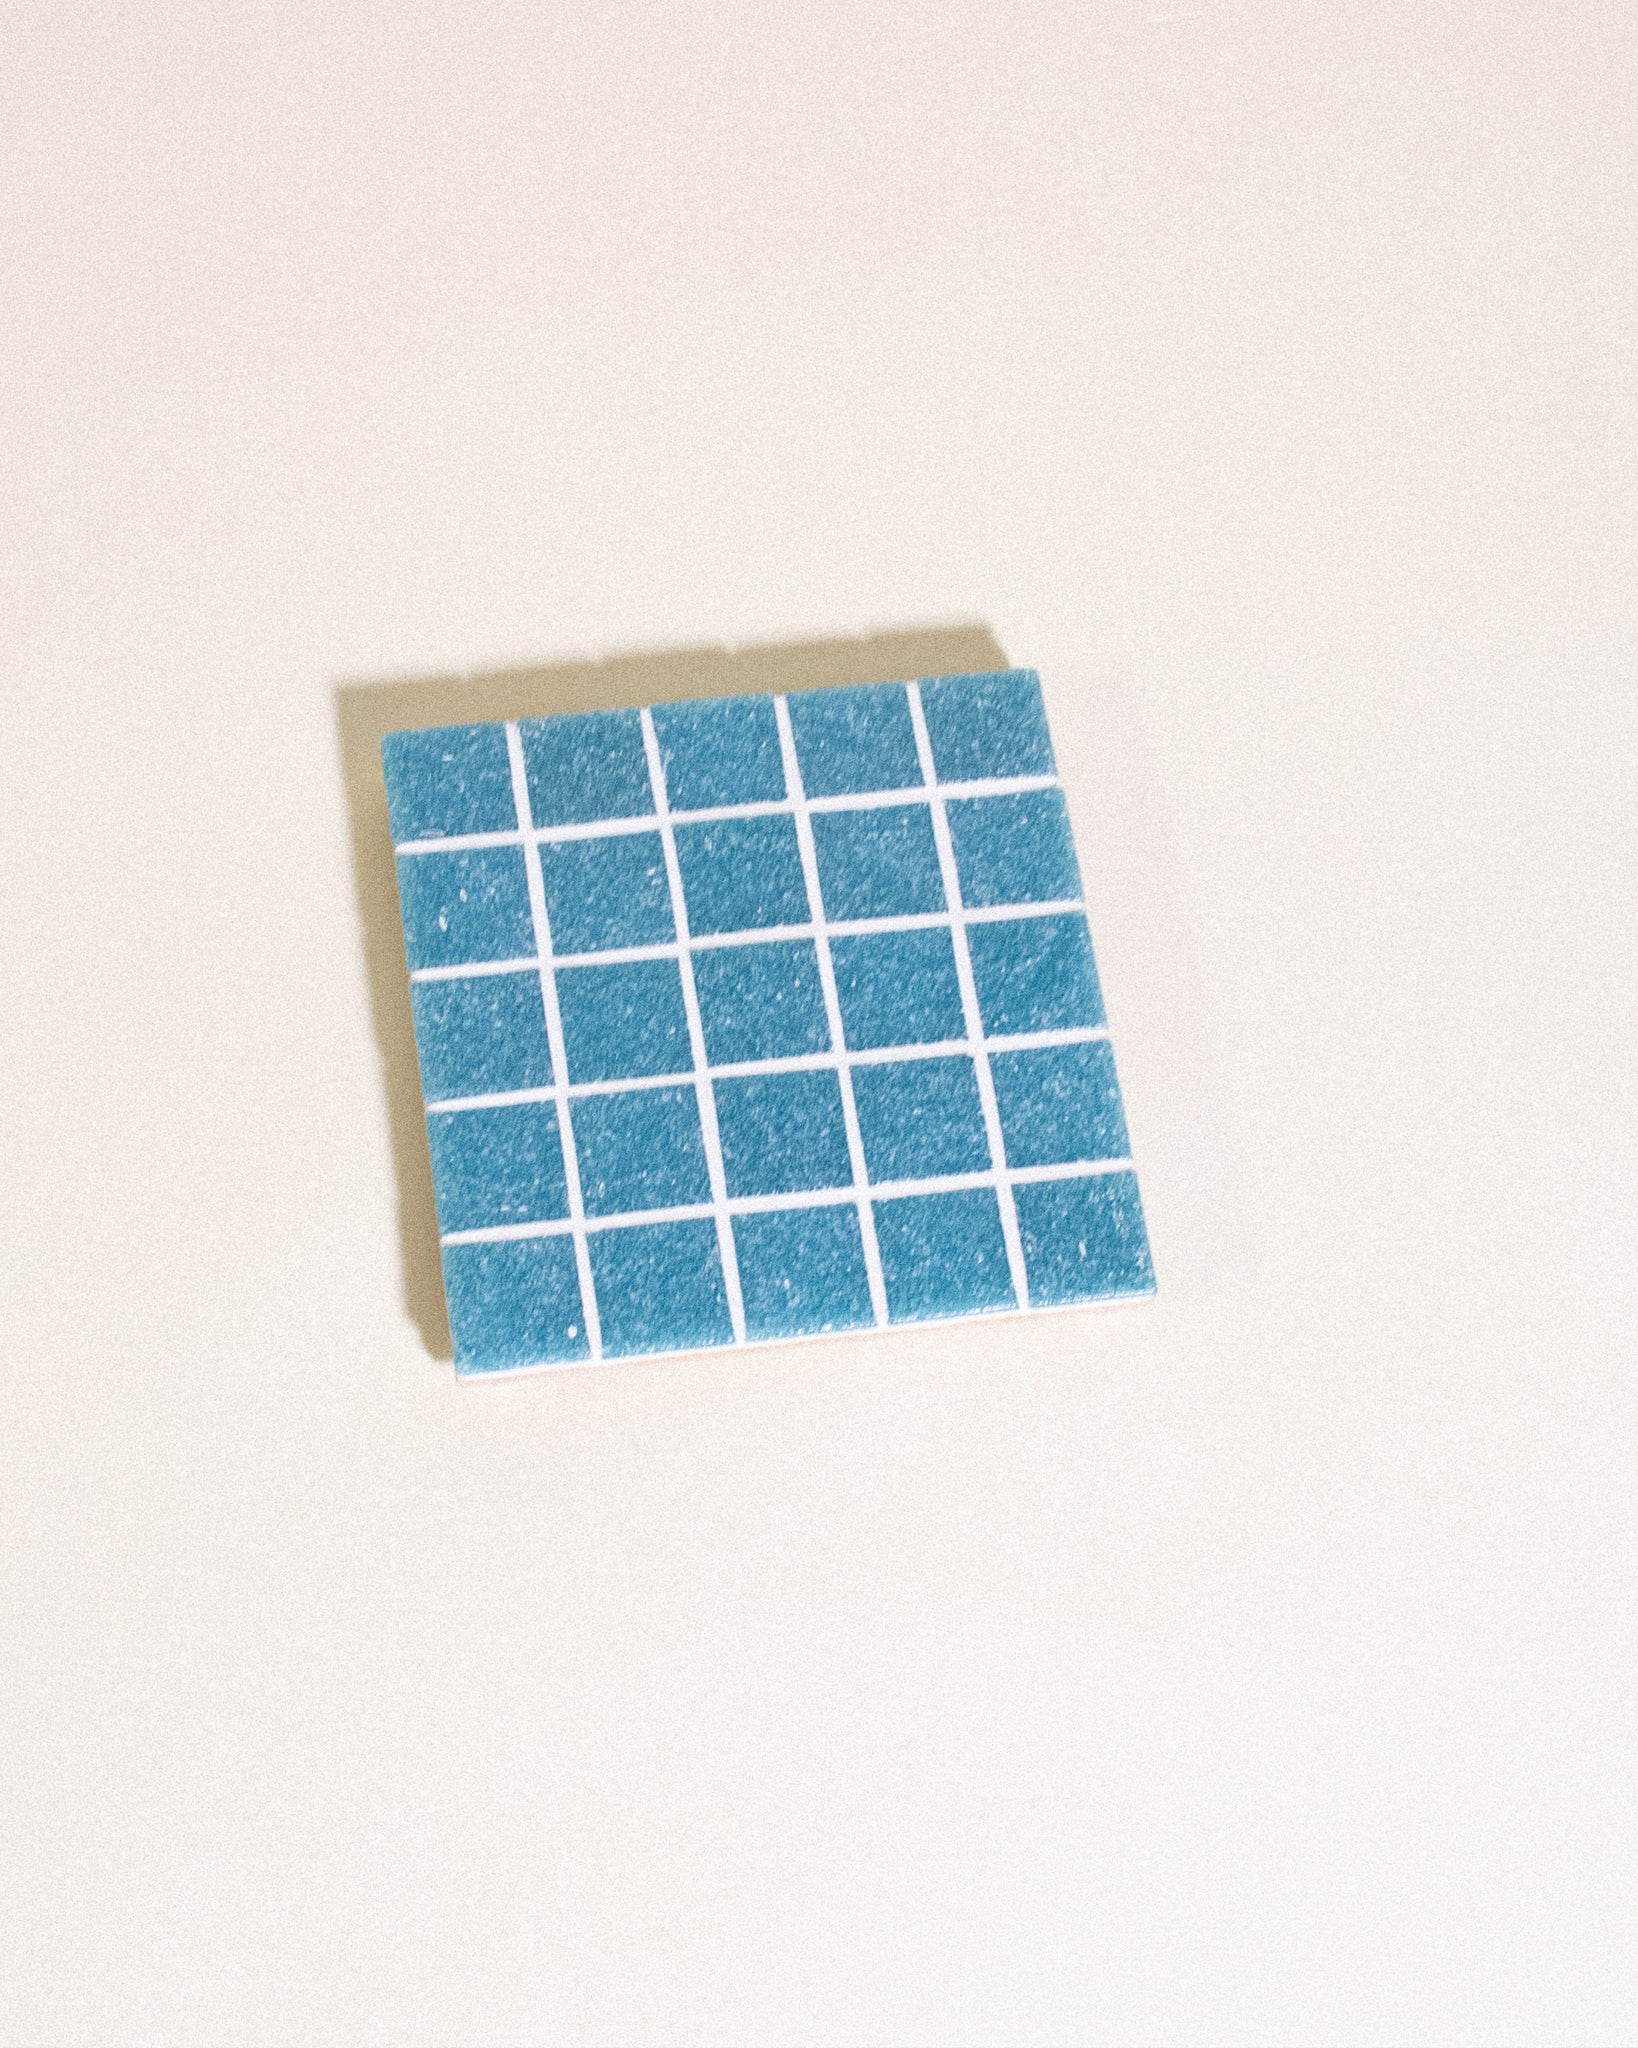 GLASS TILE COASTER - Sour Patch Candy - 05